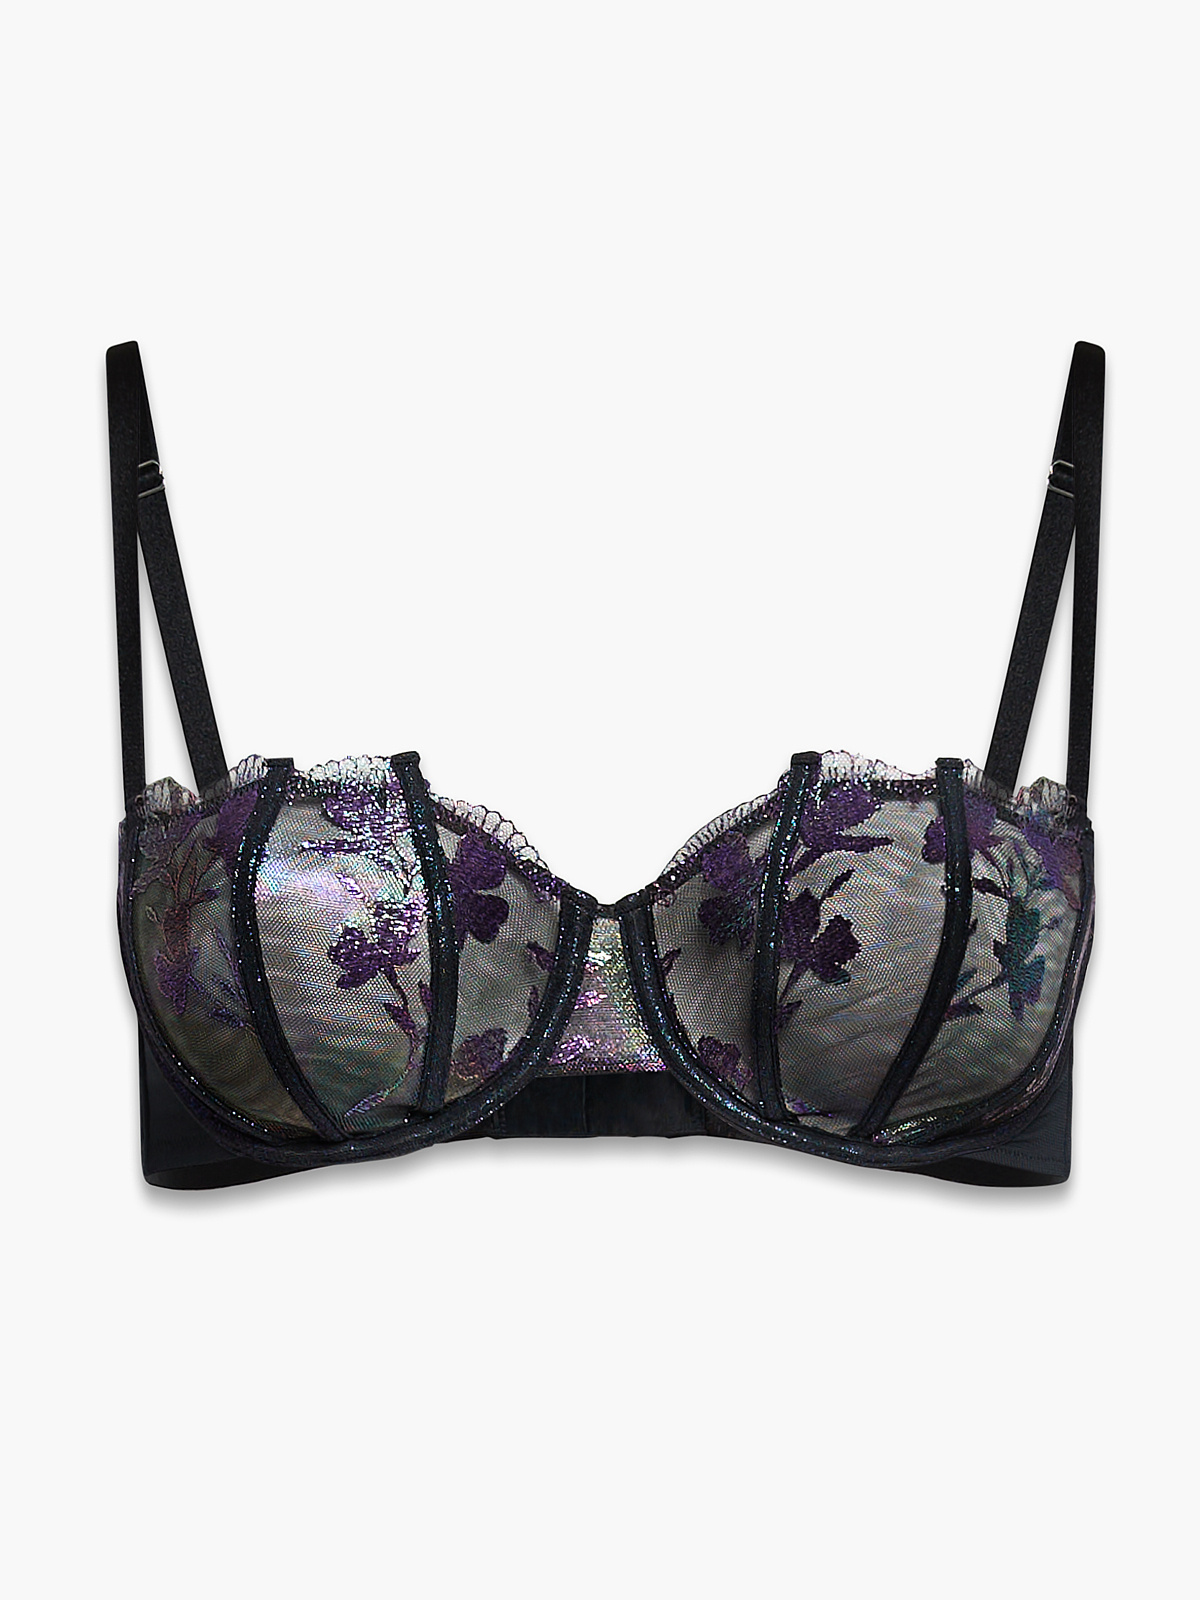 Buy Victoria's Secret Black Floral Embroidered Lace Unlined Corset Bra Top  from Next Netherlands